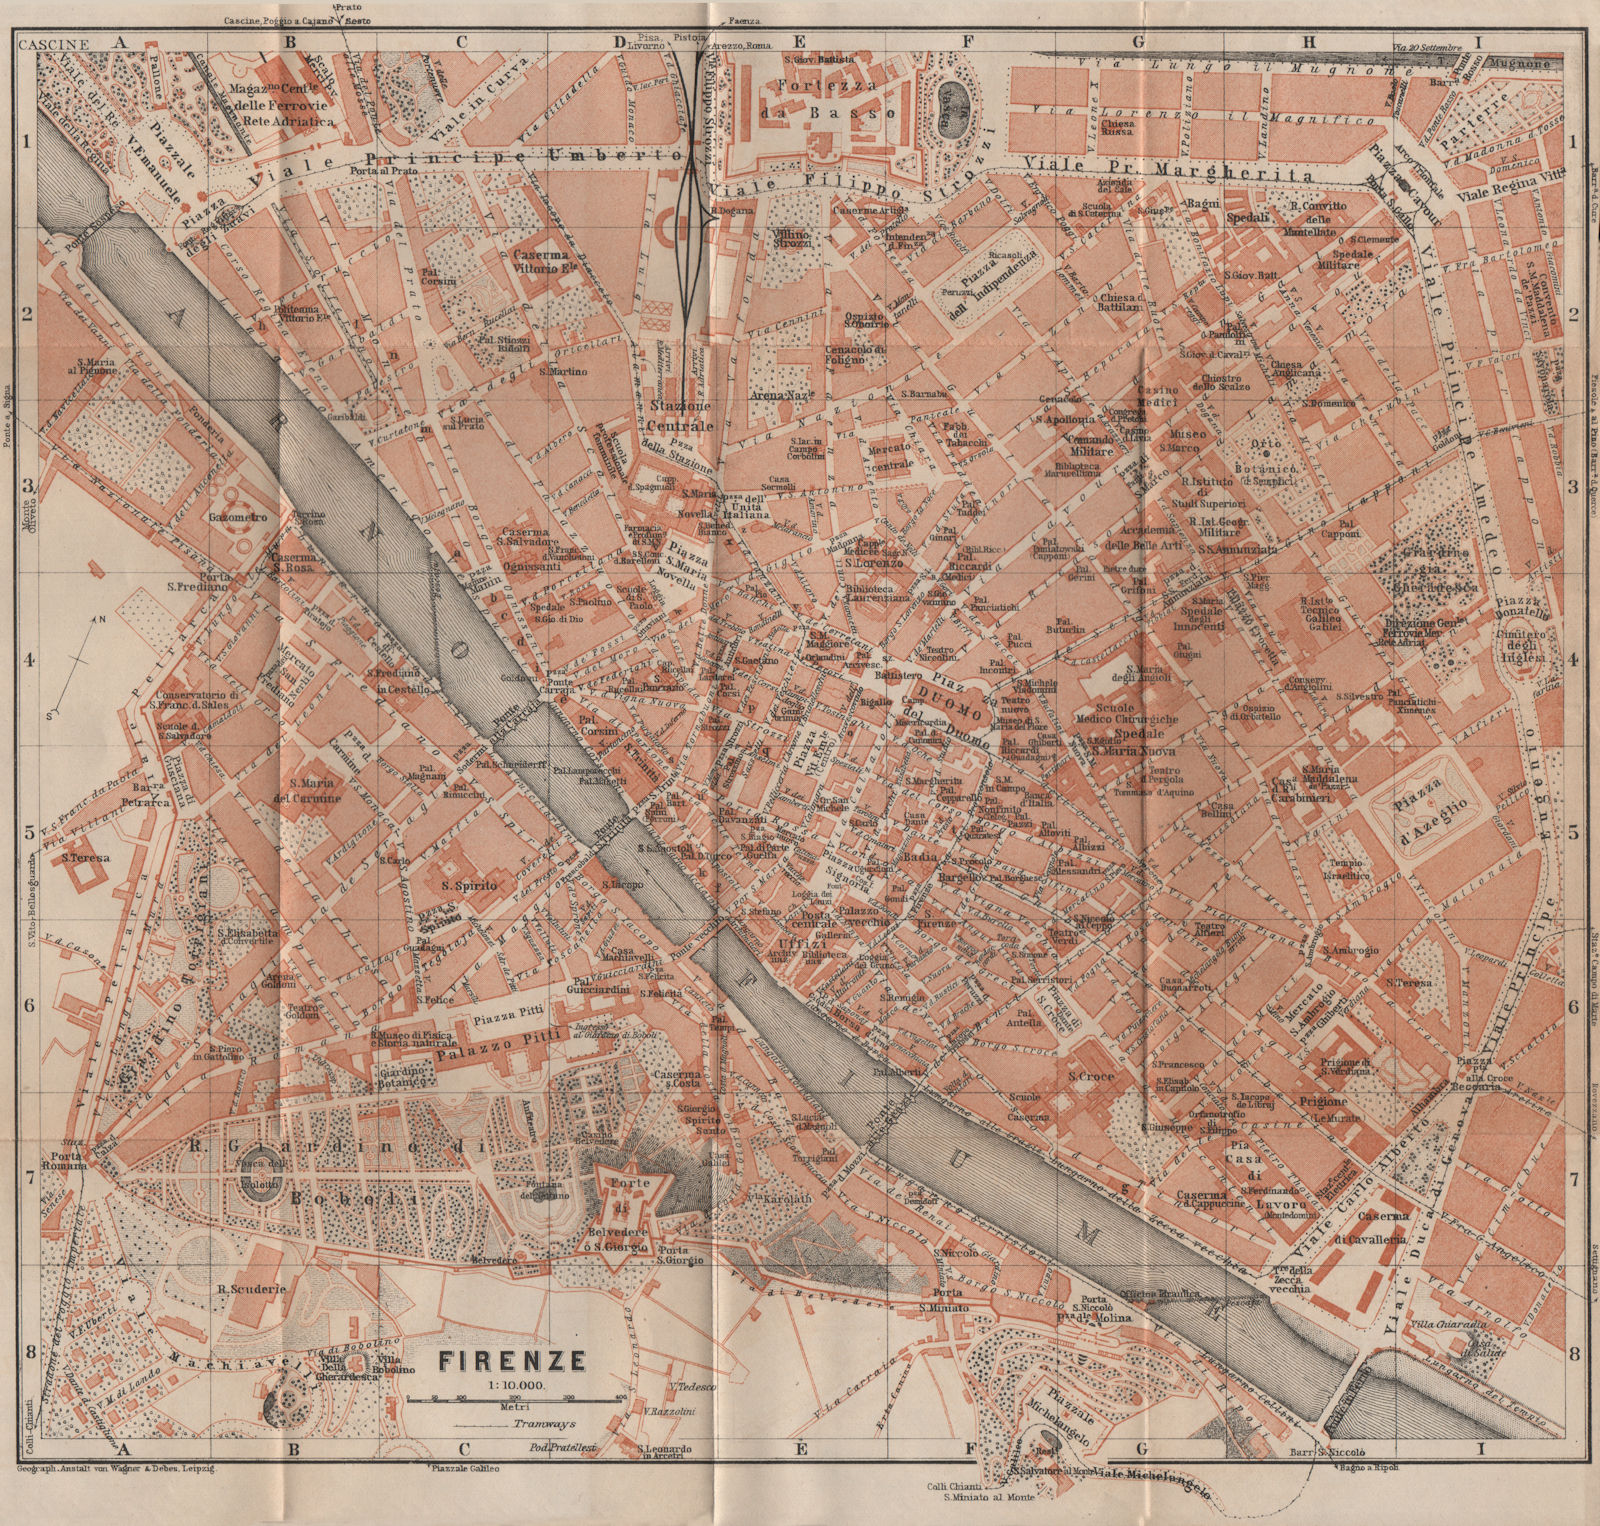 Associate Product FIRENZE FLORENCE antique town city plan piano urbanistico. Italy mappa 1903